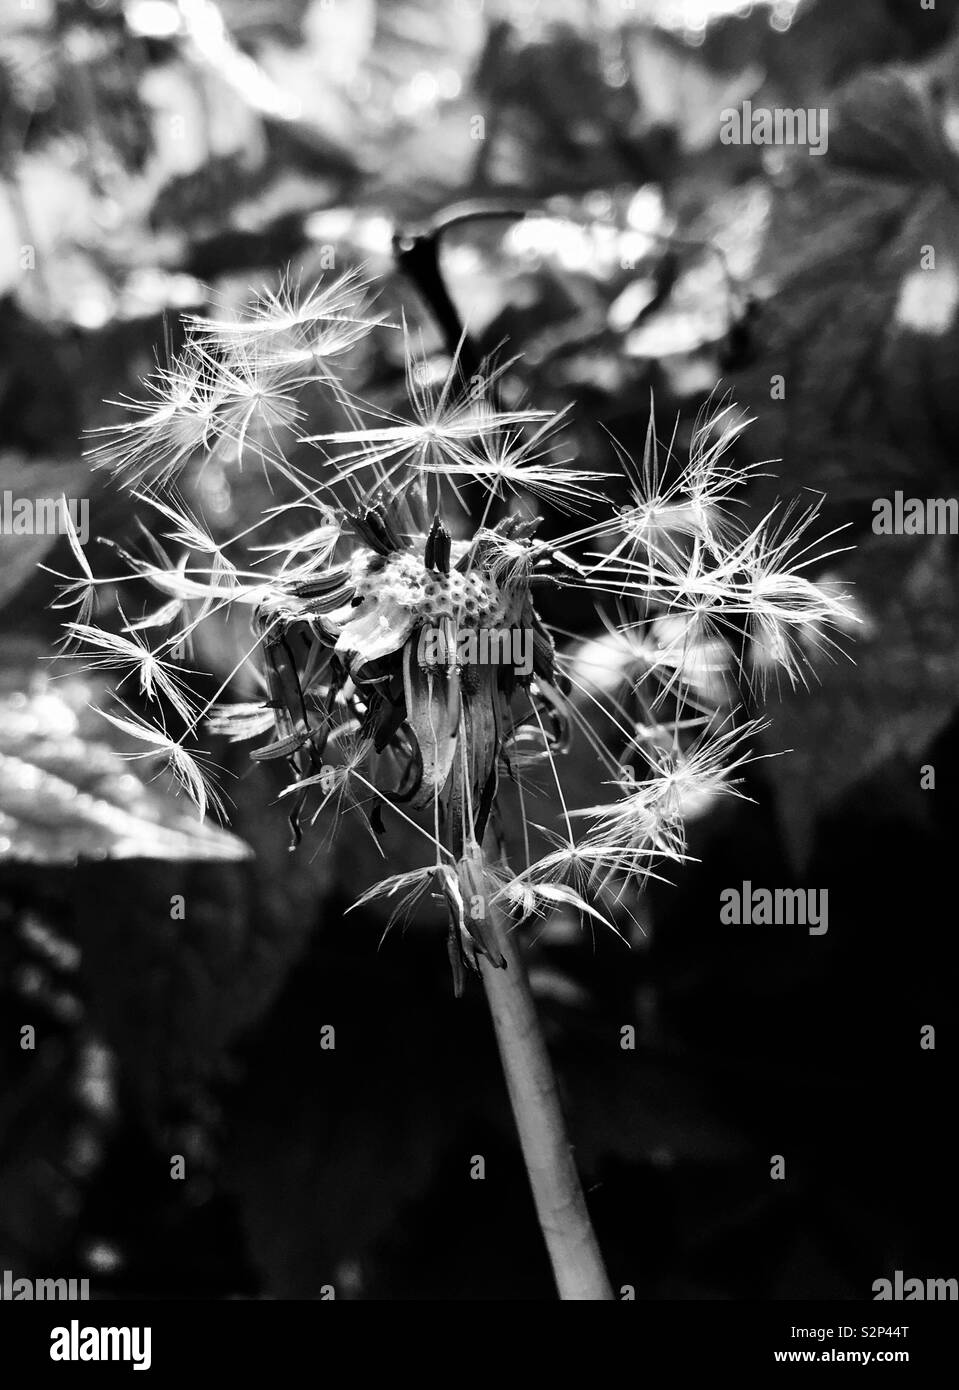 Dandelion seed head in black and white Stock Photo